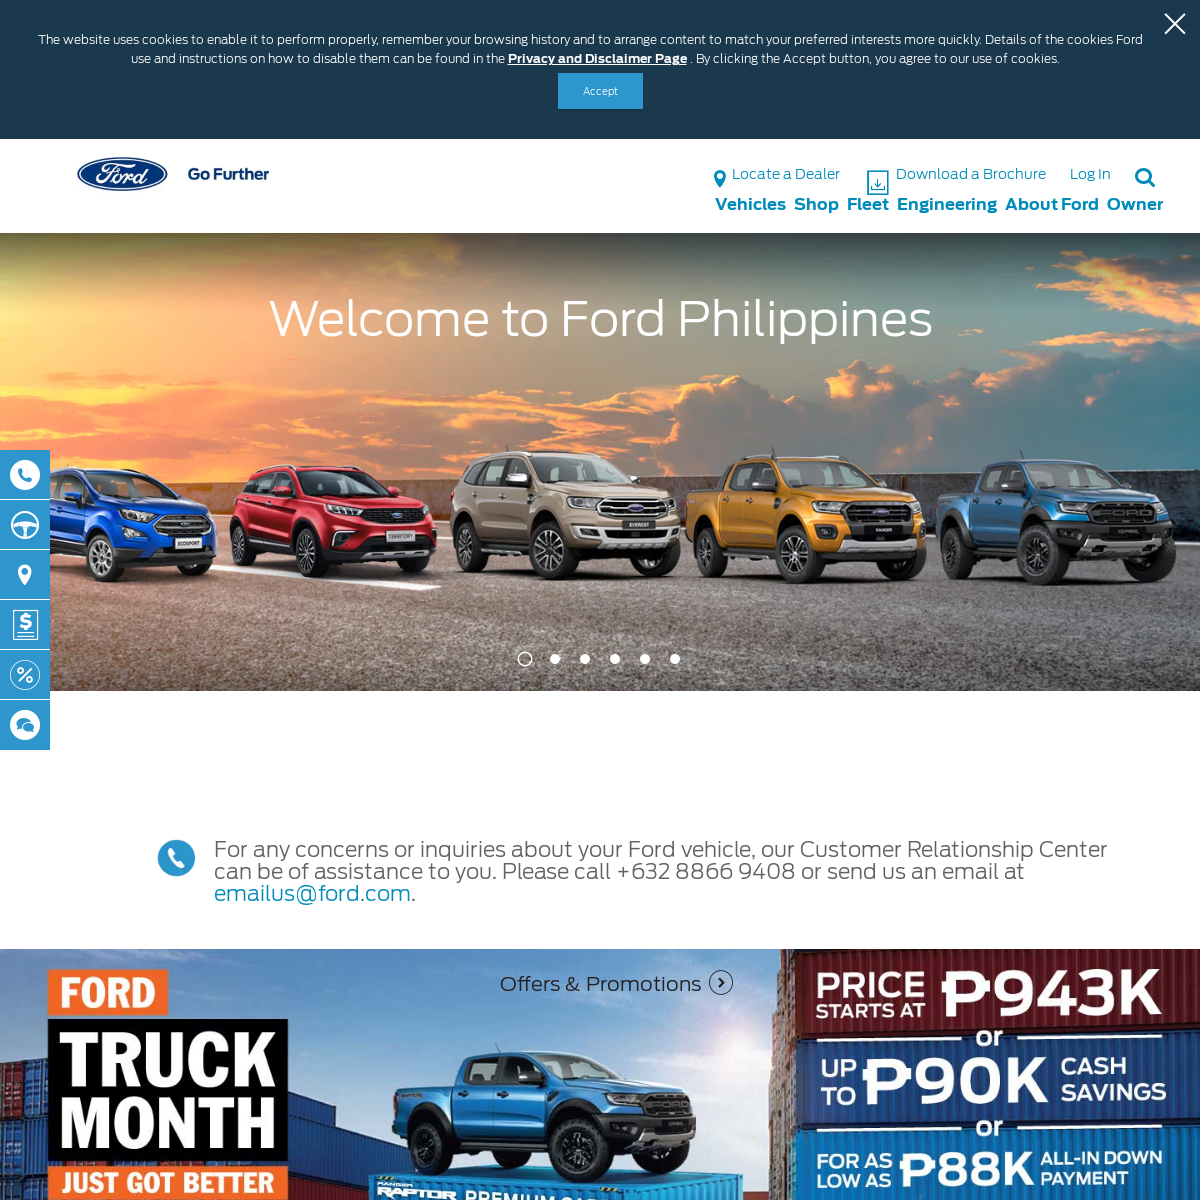 A complete backup of ford.com.ph